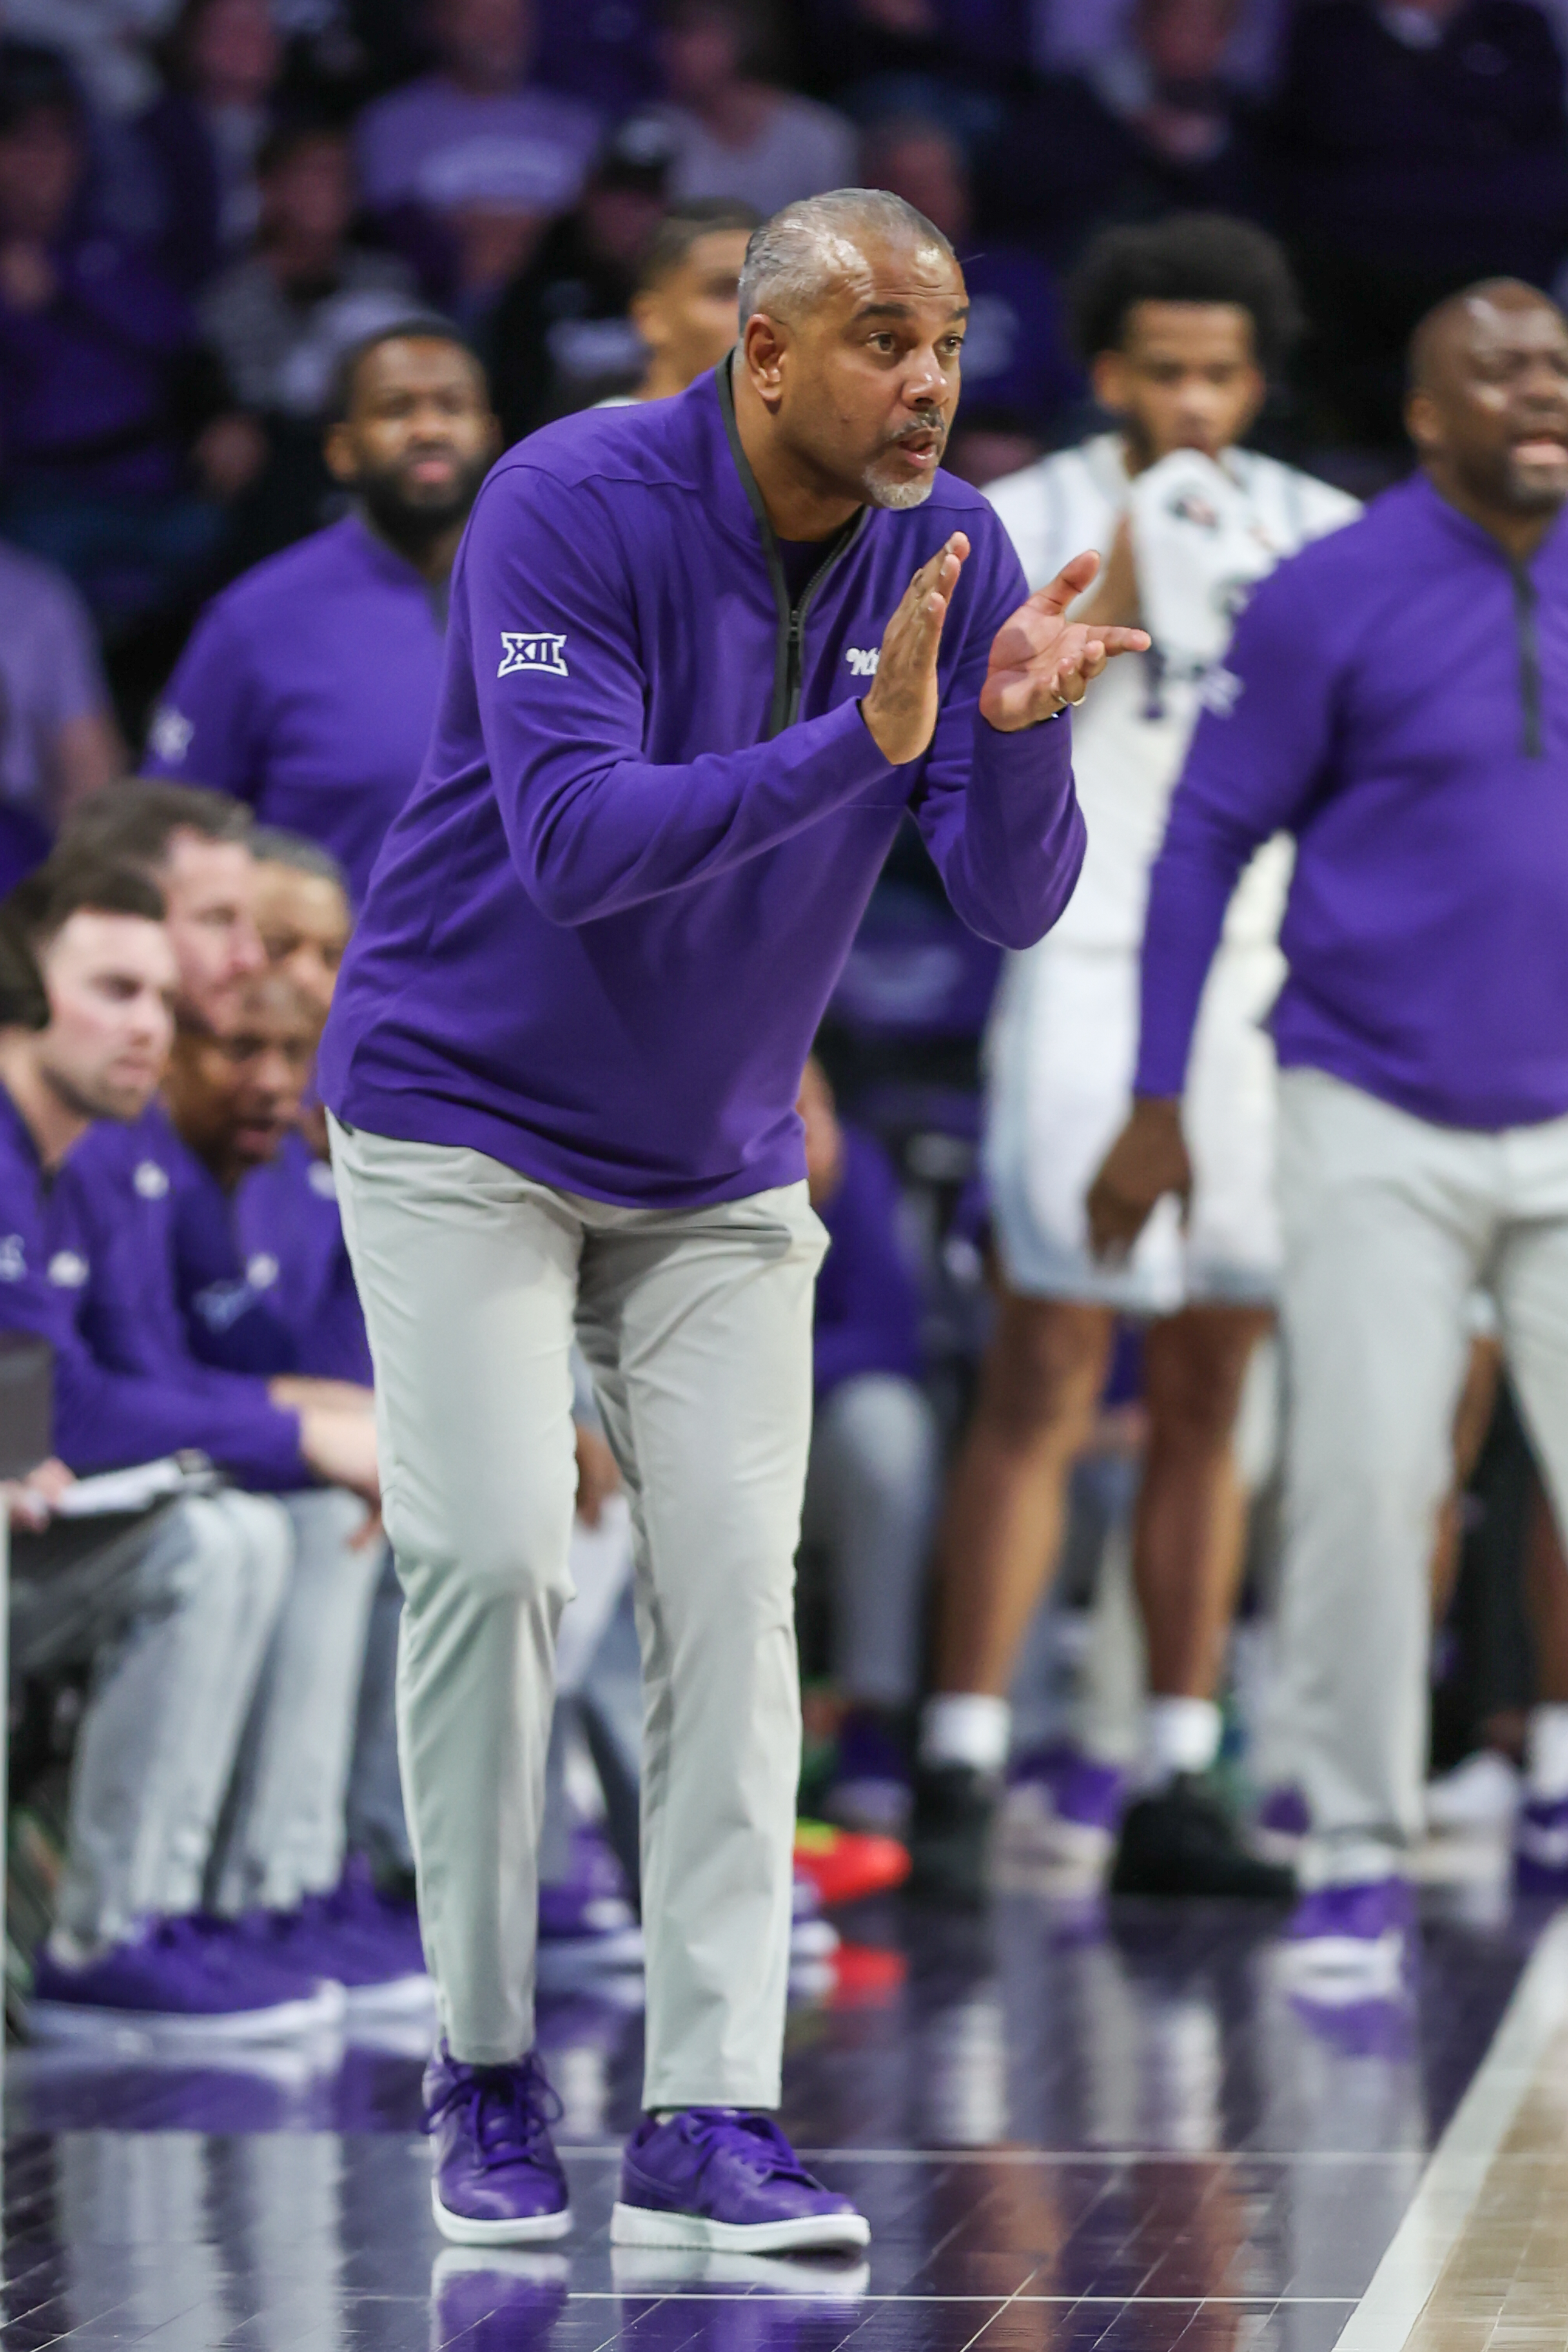 Kansas State Wildcats head coach Jerome Tang claps and cheers on his team in the second half of a Big 12 basketball game between the Oklahoma Sooners and Kansas State Wildcats on Jan 30, 2024 at Bramlage Coliseum in Manhattan, KS.